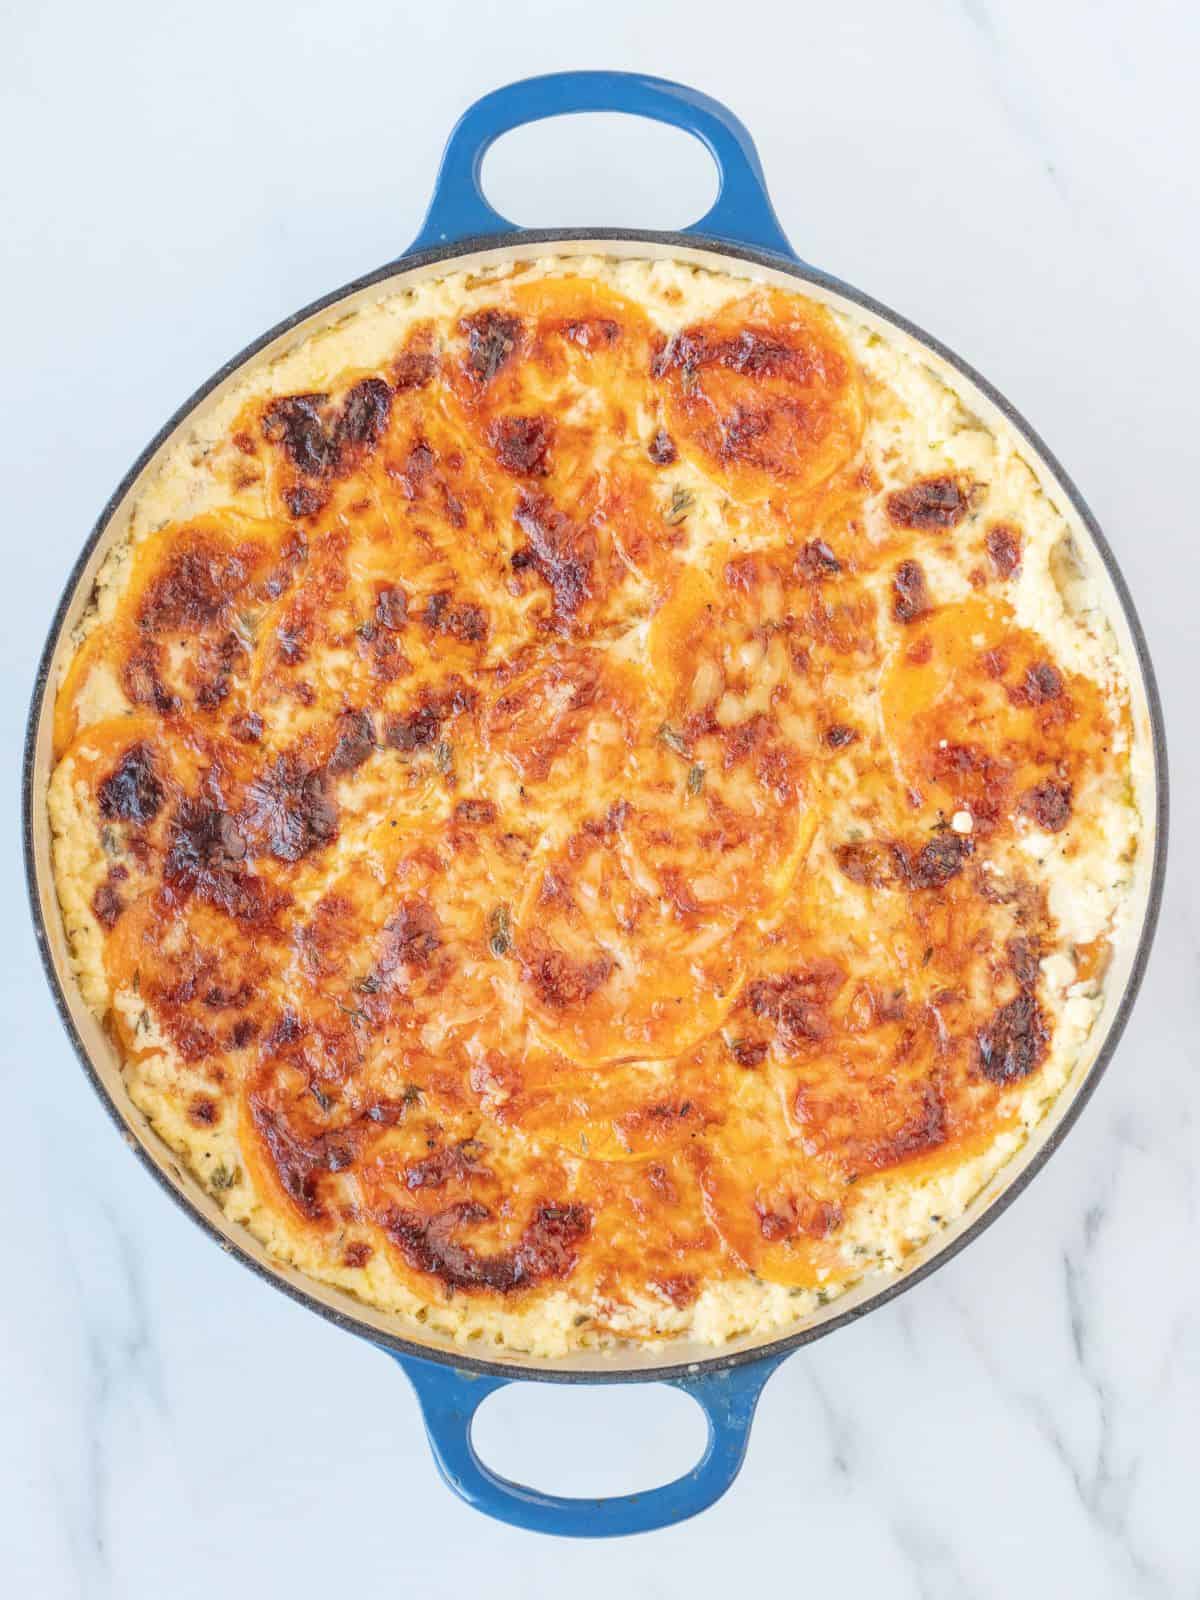 A blue dutch oven with a freshly baked sweet potato gratin.